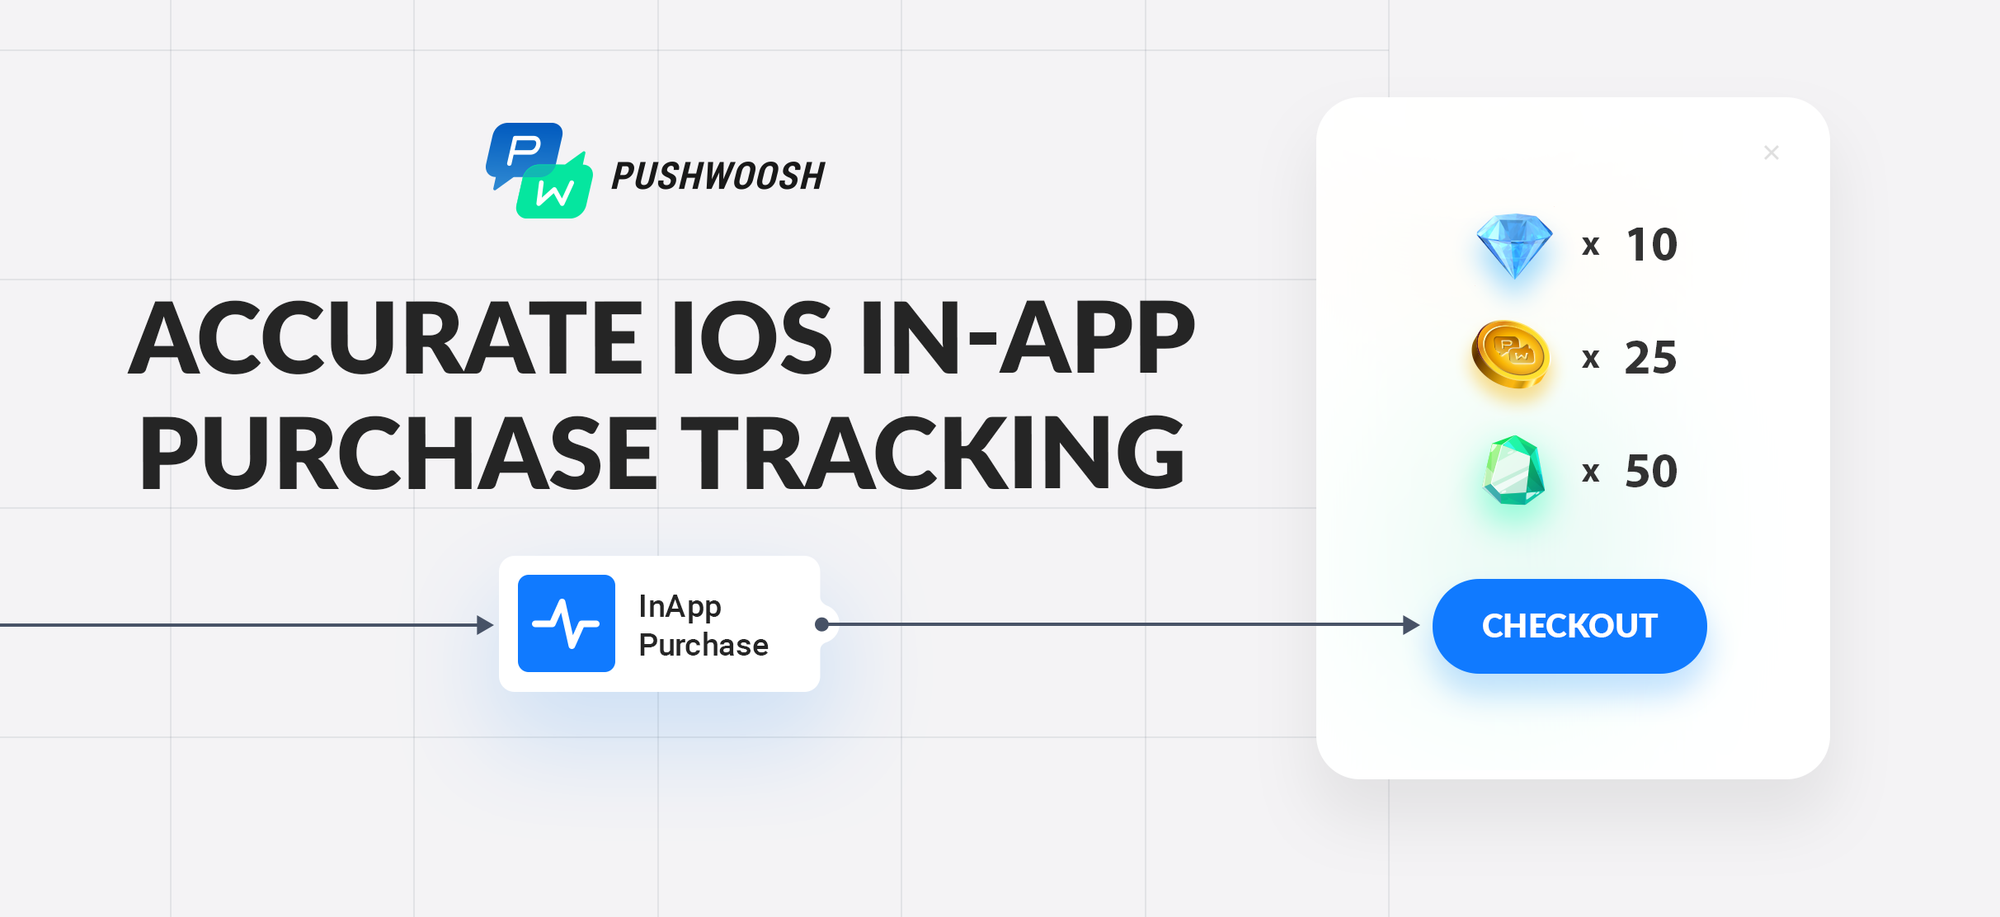 How to Track and React on iOS In-App Purchases with Pushwoosh